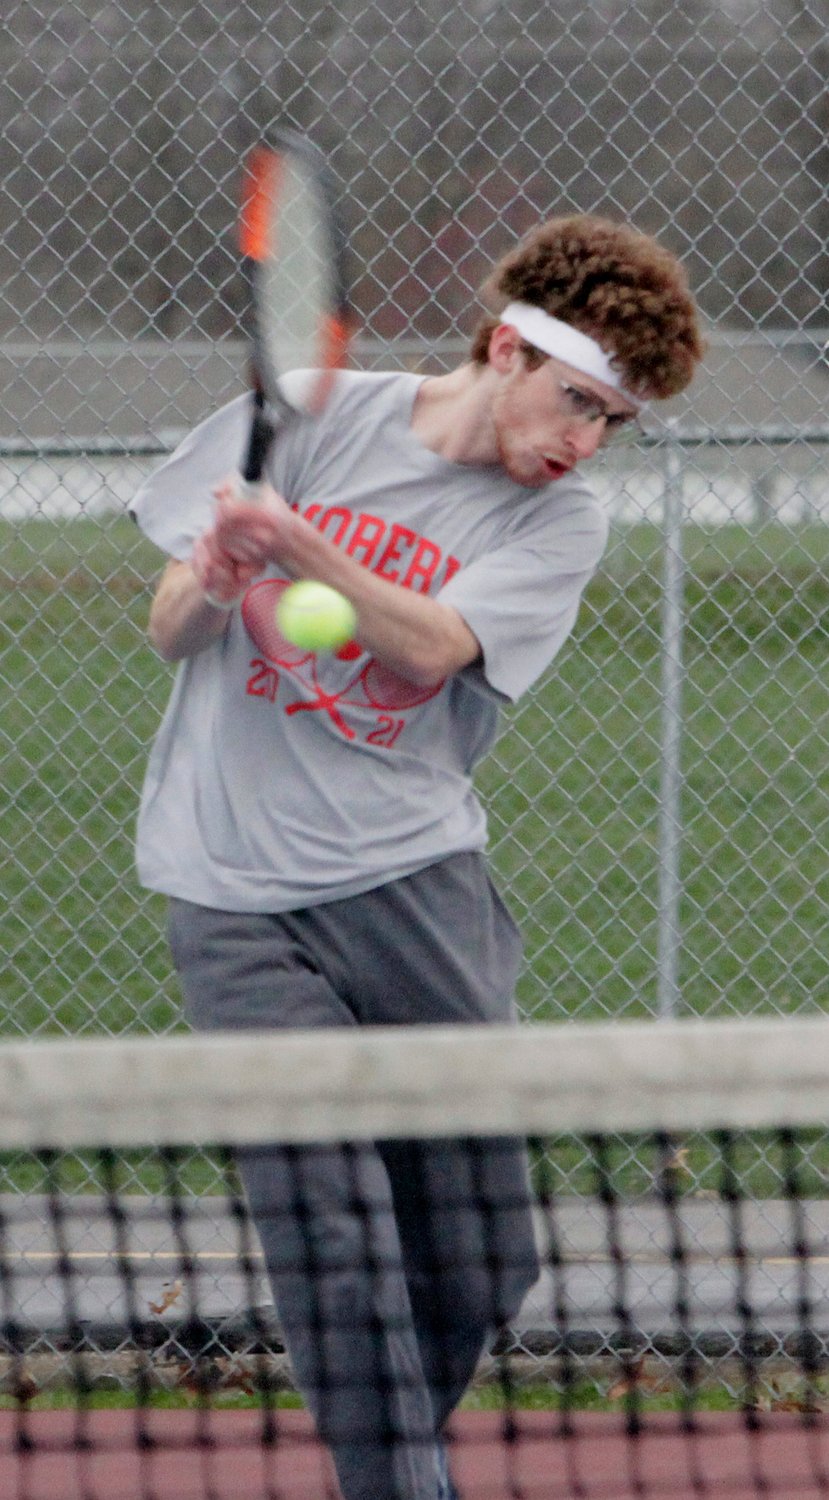 Moberly senior Nick Faiella returns a back hand stroke Tuesday during his No. 1 doubles match playing alongside William O'Loughlin. The Spartans duo fought off Boonville's Gabe Greis and Tucker Kaiser to win 9-7, helping Moberly to also win the dual meet by an 8-1 varsity result.